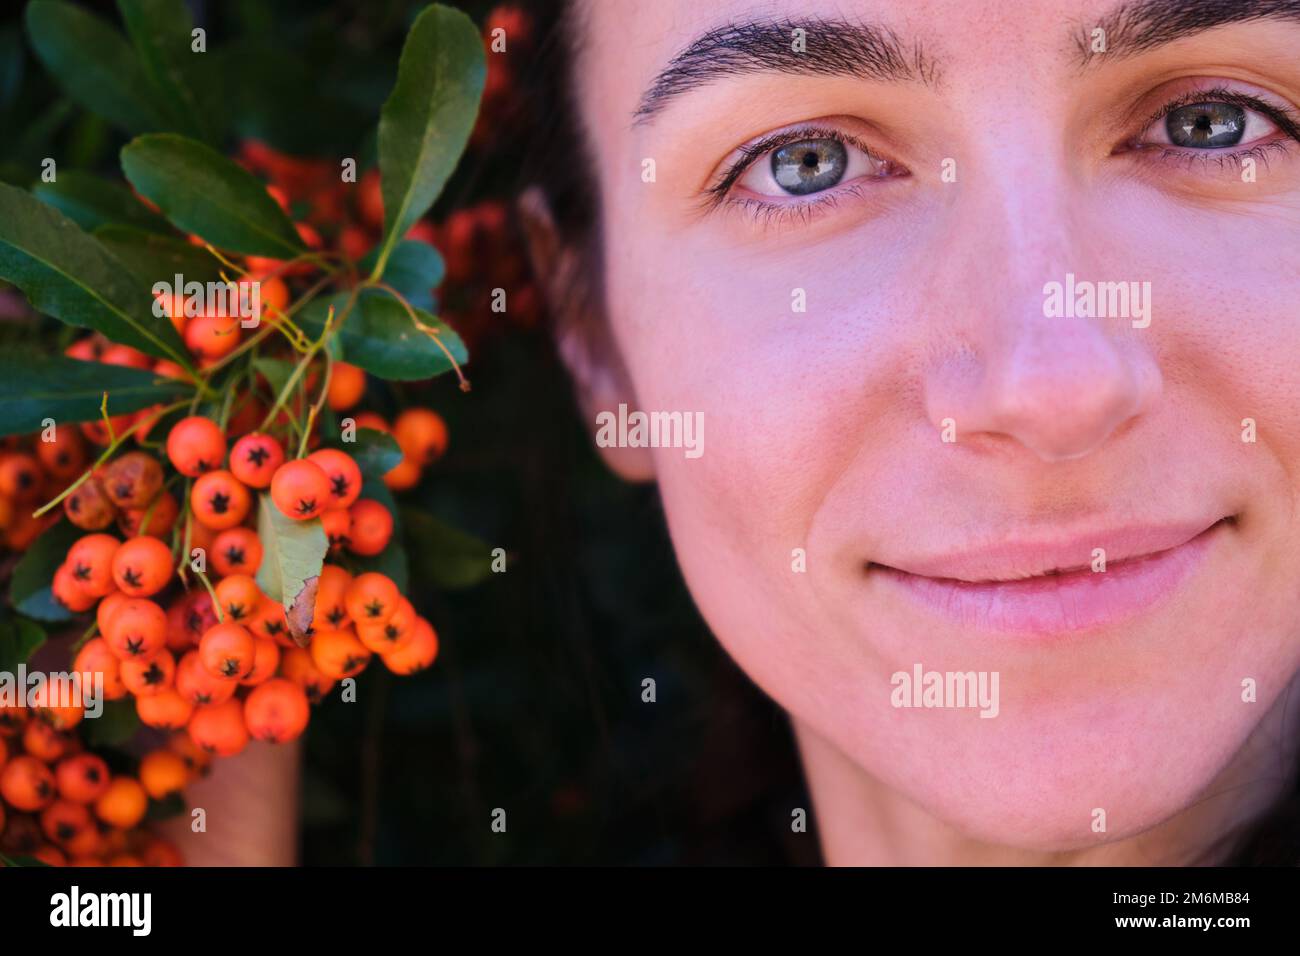 close face eyes portrait Beautiful girl Young woman orange berries Pyracantha Stock Photo